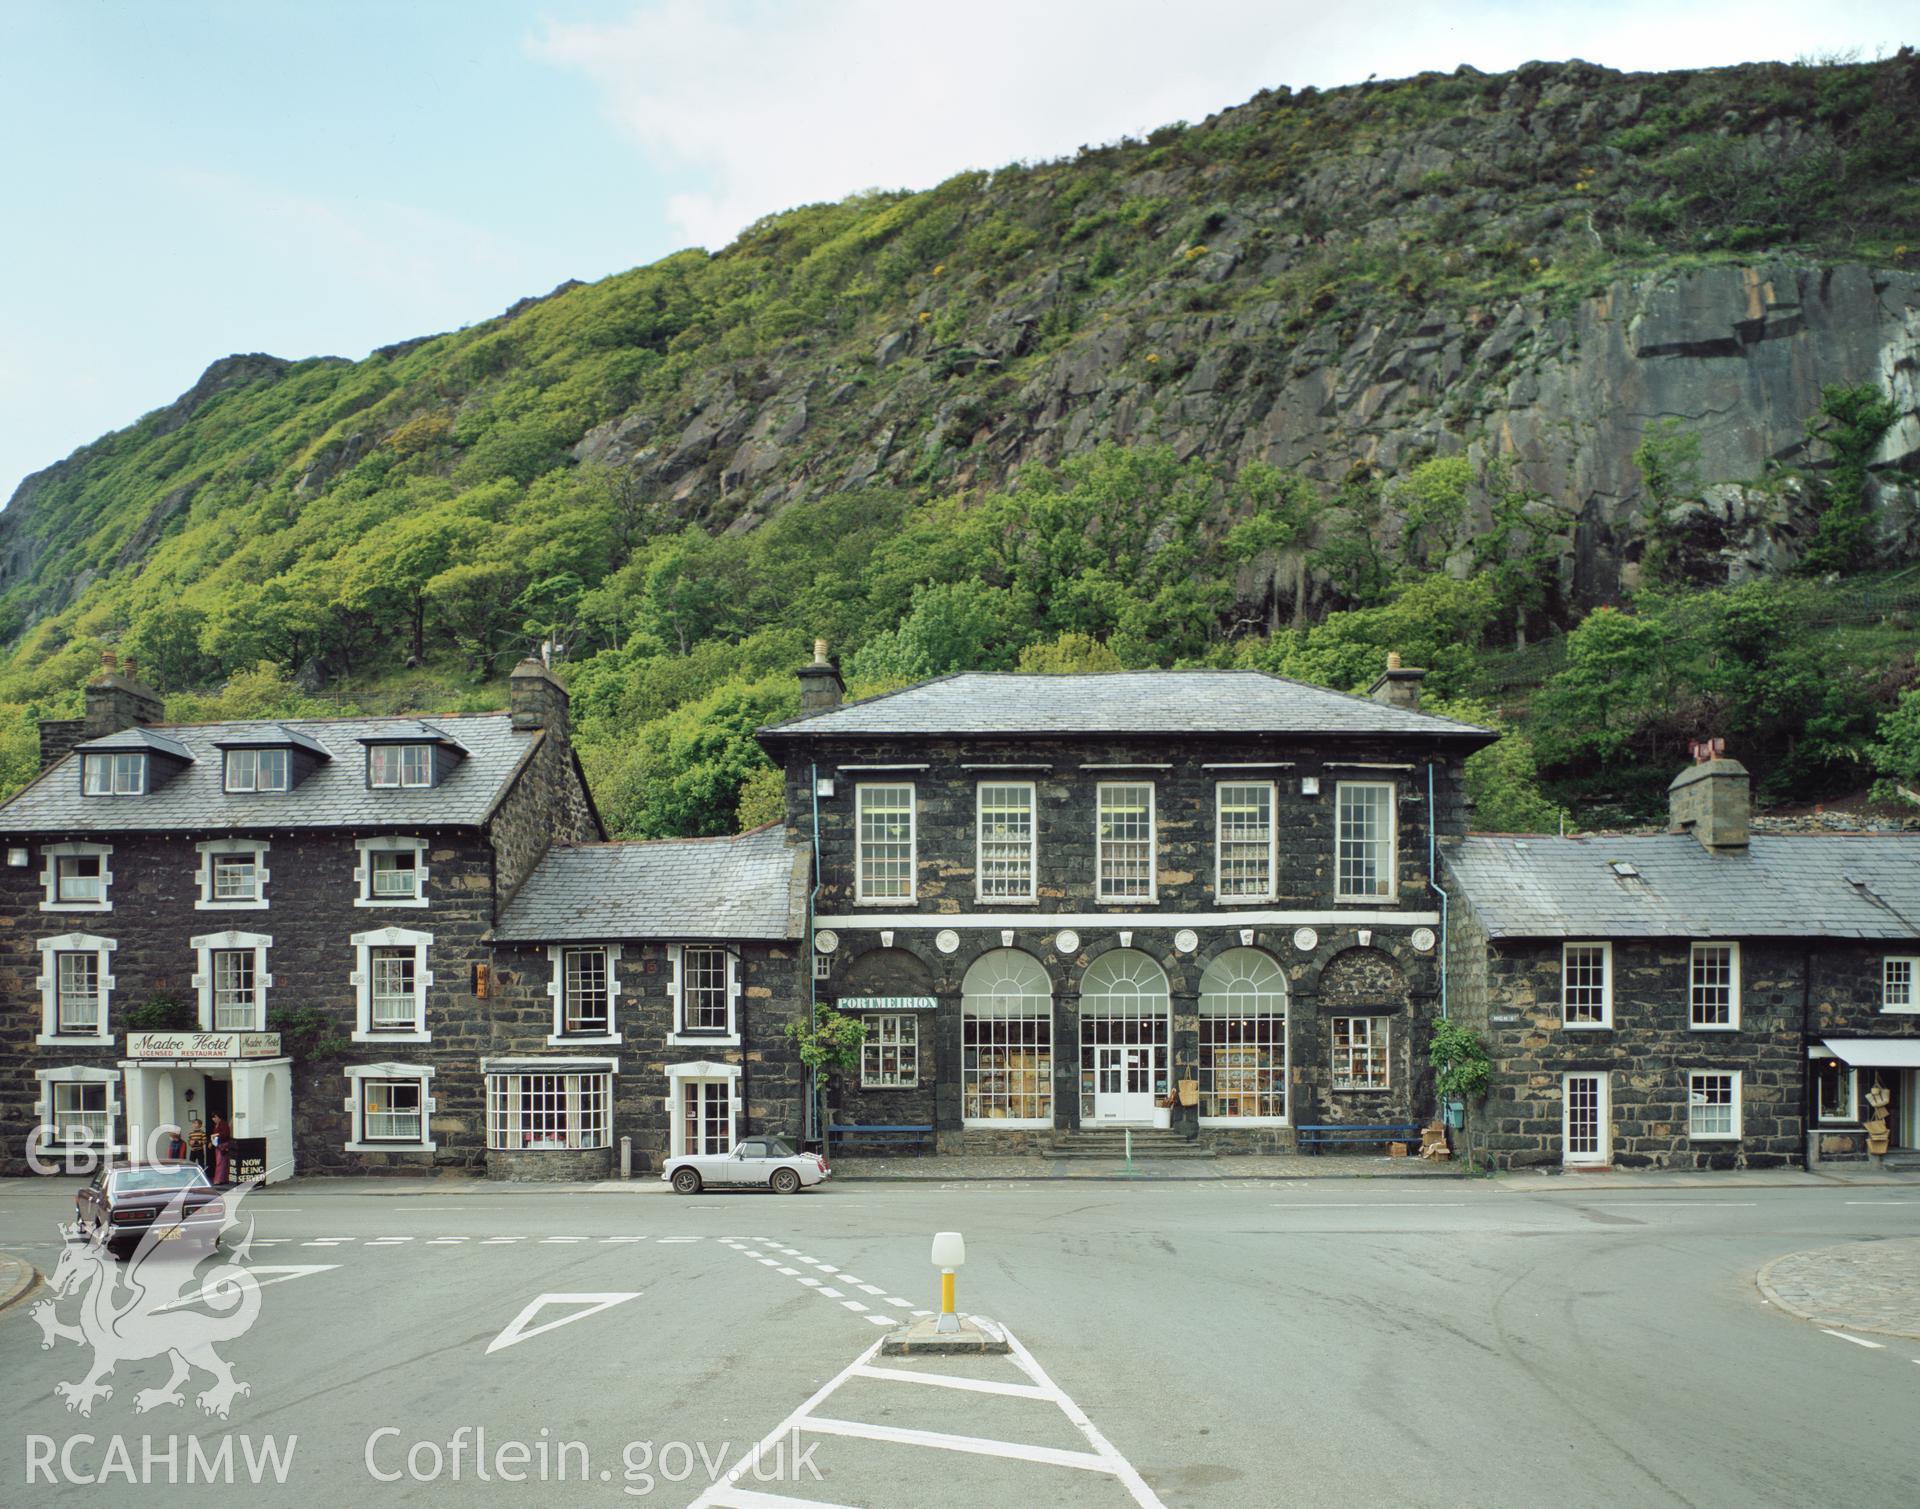 Colour transparency showing an exterior view of Market Hall, Tremadoc, produced by RCAHMW, c.1980